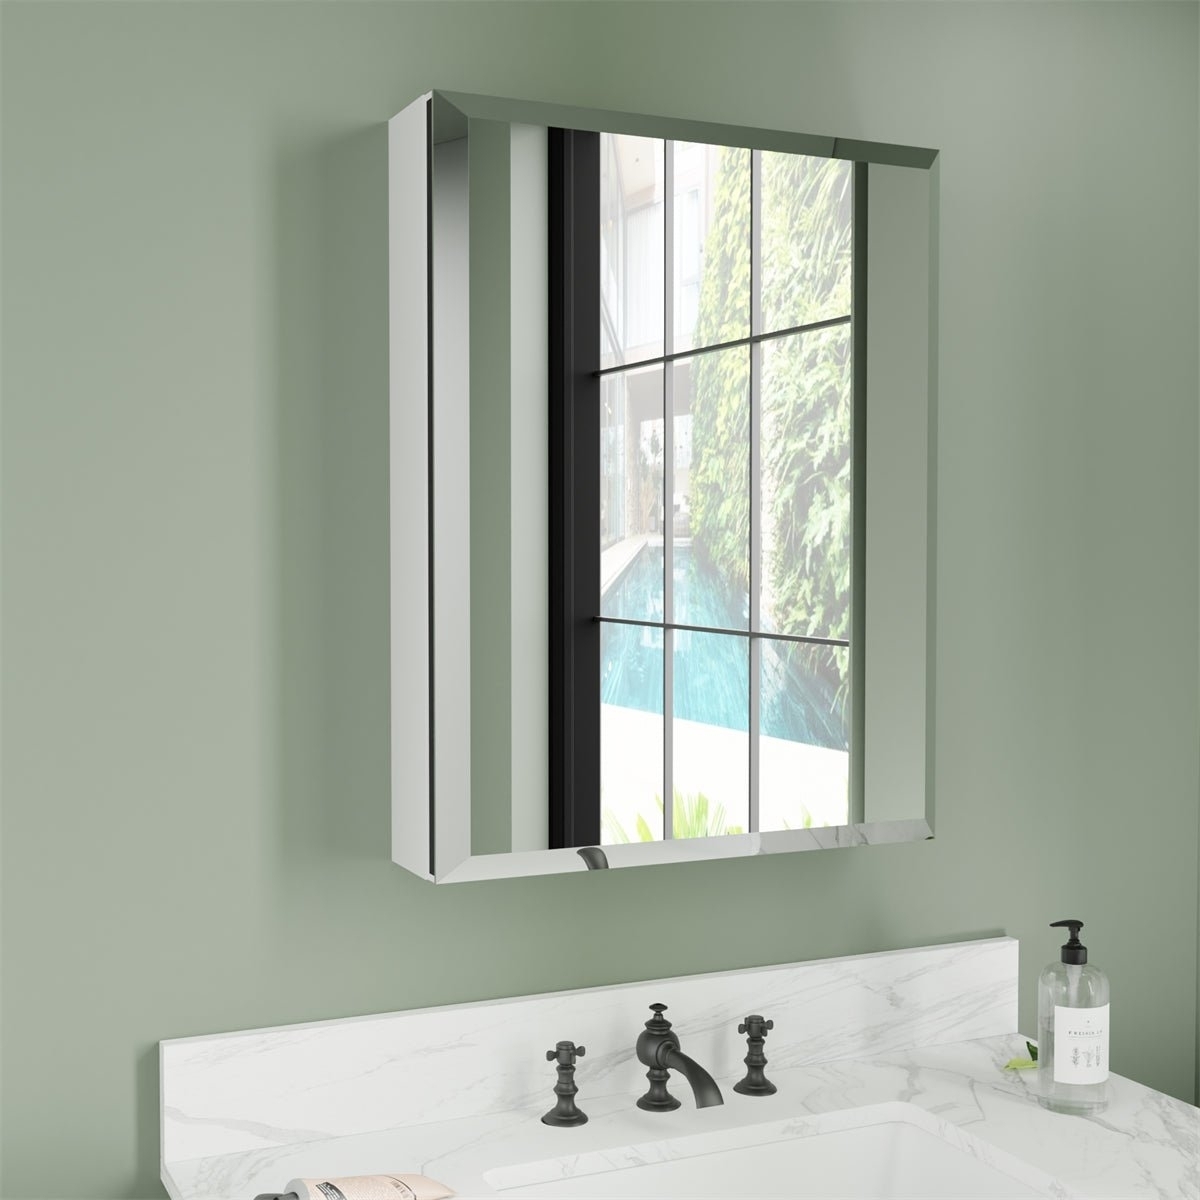 Classic 20x26 Matted Black Medicine Cabinet With Mirror Bathroom Surface Mount